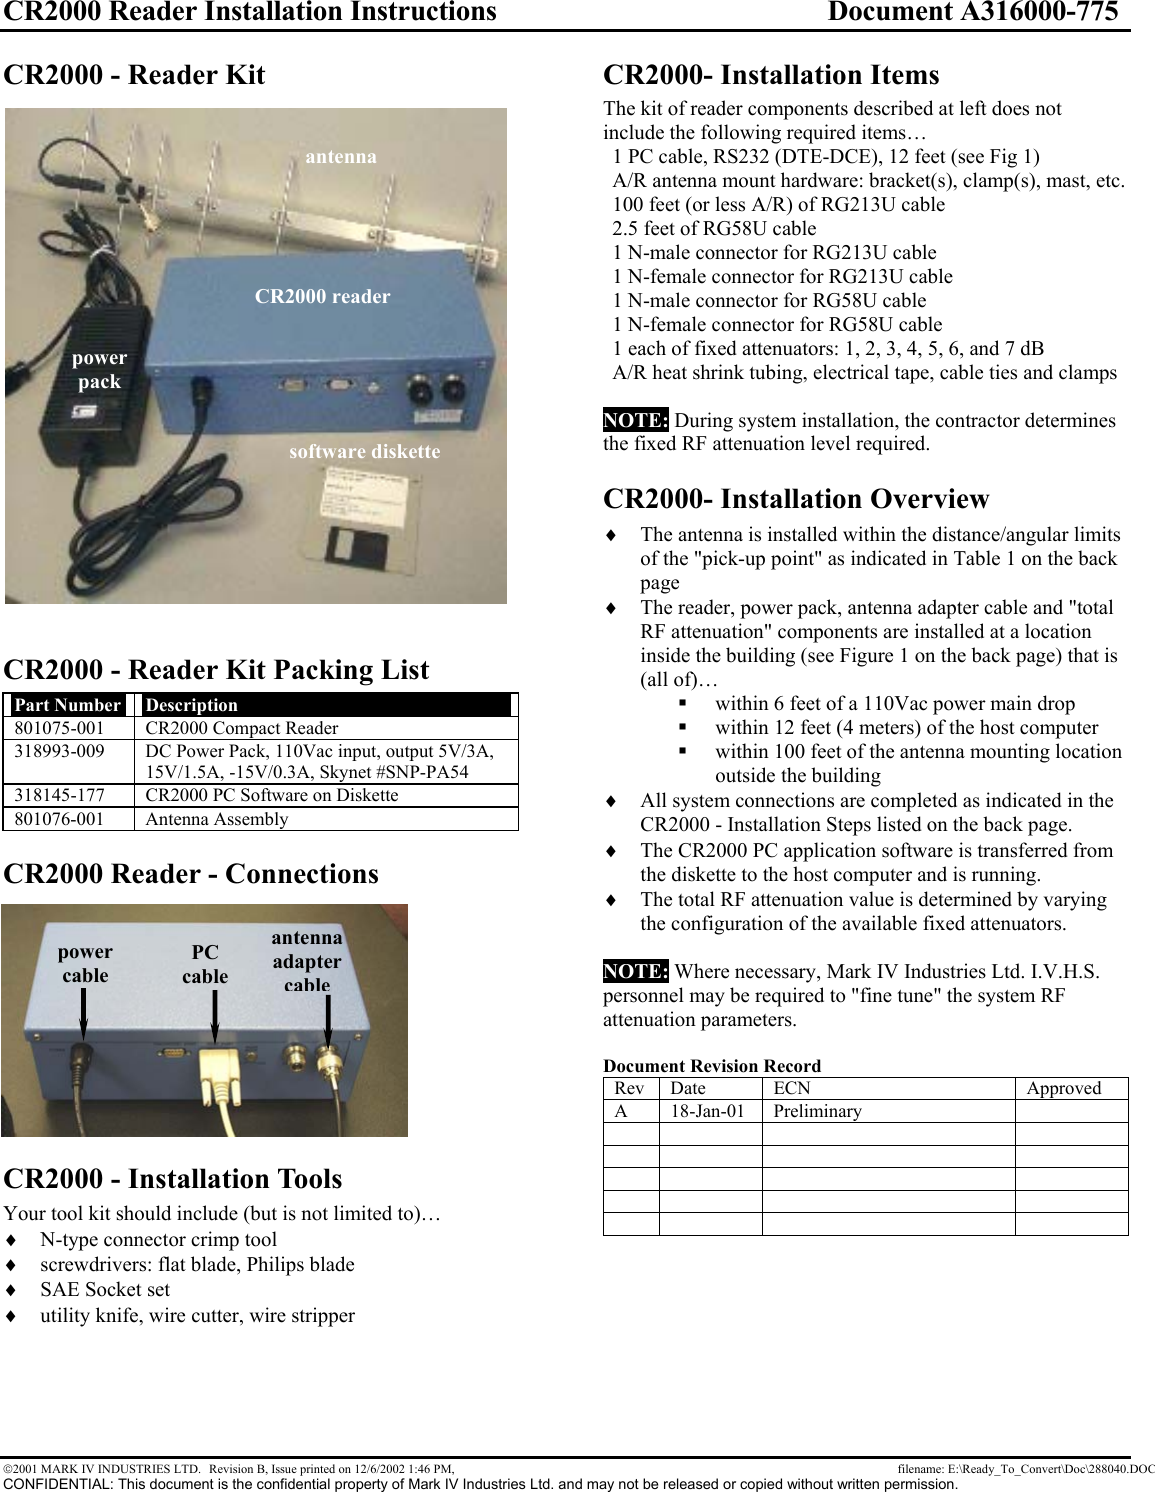 CR2000 Reader Installation Instructions  Document A316000-775 2001 MARK IV INDUSTRIES LTD.  Revision B, Issue printed on 12/6/2002 1:46 PM,    filename: E:\Ready_To_Convert\Doc\288040.DOC CONFIDENTIAL: This document is the confidential property of Mark IV Industries Ltd. and may not be released or copied without written permission. CR2000 - Reader Kit  CR2000 - Reader Kit Packing List Part Number  Description 801075-001  CR2000 Compact Reader 318993-009  DC Power Pack, 110Vac input, output 5V/3A, 15V/1.5A, -15V/0.3A, Skynet #SNP-PA54 318145-177  CR2000 PC Software on Diskette 801076-001 Antenna Assembly CR2000 Reader - Connections CR2000 - Installation Tools Your tool kit should include (but is not limited to)… ♦ N-type connector crimp tool ♦ screwdrivers: flat blade, Philips blade ♦ SAE Socket set ♦ utility knife, wire cutter, wire stripper CR2000- Installation Items The kit of reader components described at left does not include the following required items… 1 PC cable, RS232 (DTE-DCE), 12 feet (see Fig 1) A/R antenna mount hardware: bracket(s), clamp(s), mast, etc. 100 feet (or less A/R) of RG213U cable 2.5 feet of RG58U cable 1 N-male connector for RG213U cable 1 N-female connector for RG213U cable 1 N-male connector for RG58U cable 1 N-female connector for RG58U cable 1 each of fixed attenuators: 1, 2, 3, 4, 5, 6, and 7 dB A/R heat shrink tubing, electrical tape, cable ties and clamps  NOTE: During system installation, the contractor determines the fixed RF attenuation level required. CR2000- Installation Overview ♦ The antenna is installed within the distance/angular limits of the &quot;pick-up point&quot; as indicated in Table 1 on the back page ♦ The reader, power pack, antenna adapter cable and &quot;total RF attenuation&quot; components are installed at a location inside the building (see Figure 1 on the back page) that is (all of)…  within 6 feet of a 110Vac power main drop   within 12 feet (4 meters) of the host computer   within 100 feet of the antenna mounting location outside the building ♦ All system connections are completed as indicated in the CR2000 - Installation Steps listed on the back page. ♦ The CR2000 PC application software is transferred from the diskette to the host computer and is running. ♦ The total RF attenuation value is determined by varying the configuration of the available fixed attenuators.  NOTE: Where necessary, Mark IV Industries Ltd. I.V.H.S. personnel may be required to &quot;fine tune&quot; the system RF attenuation parameters.  Document Revision Record Rev Date  ECN  Approved A 18-Jan-01 Preliminary                                  power cable antenna  adapter cablePC cable CR2000 reader antenna software diskette power pack 